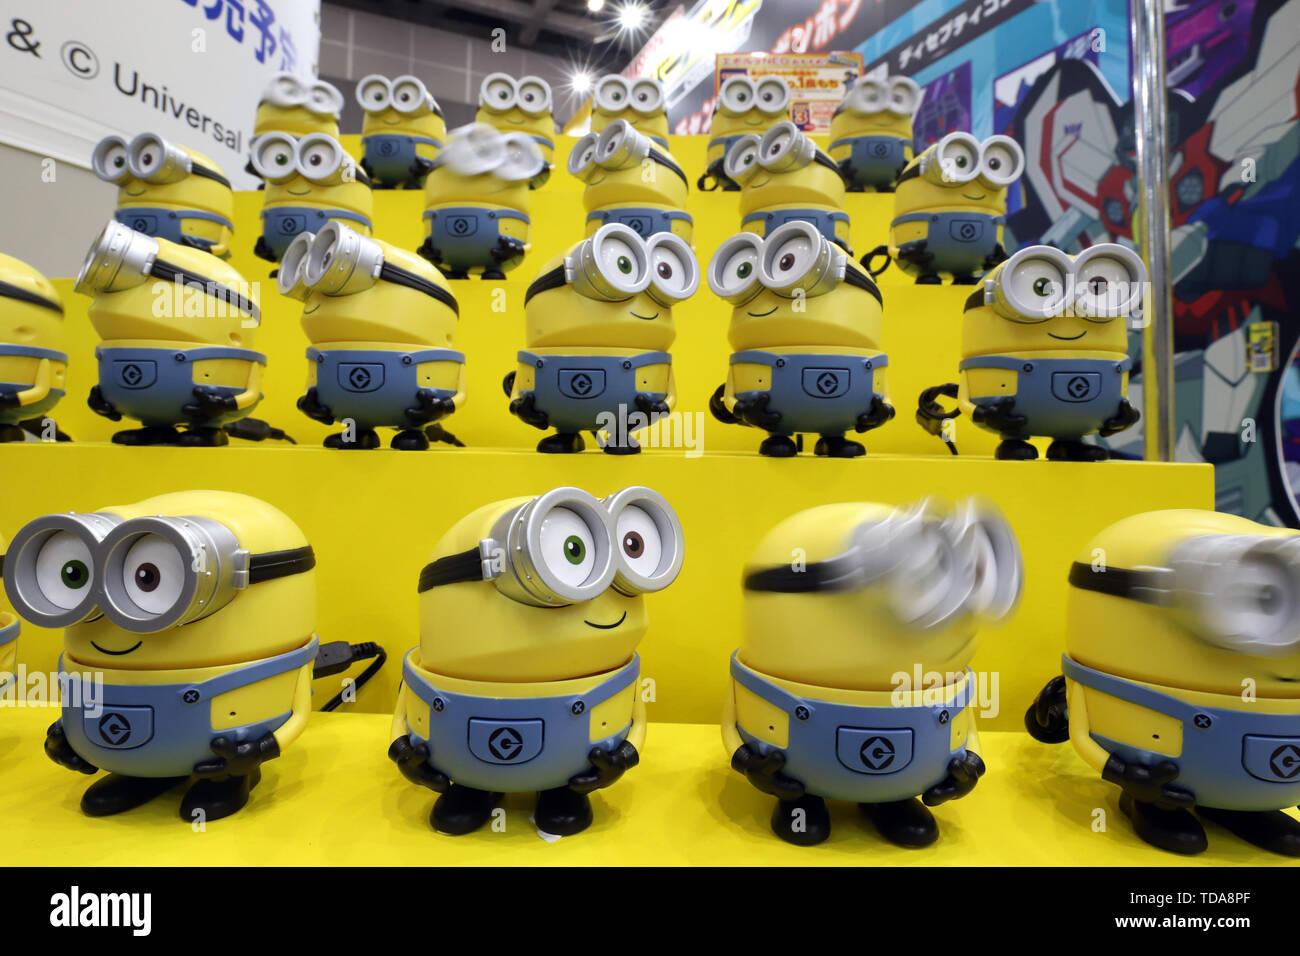 Tokyo, Japan. 13th June, 2019. Japan's toy maker Tomy displays movie  character Minions shaped robots 